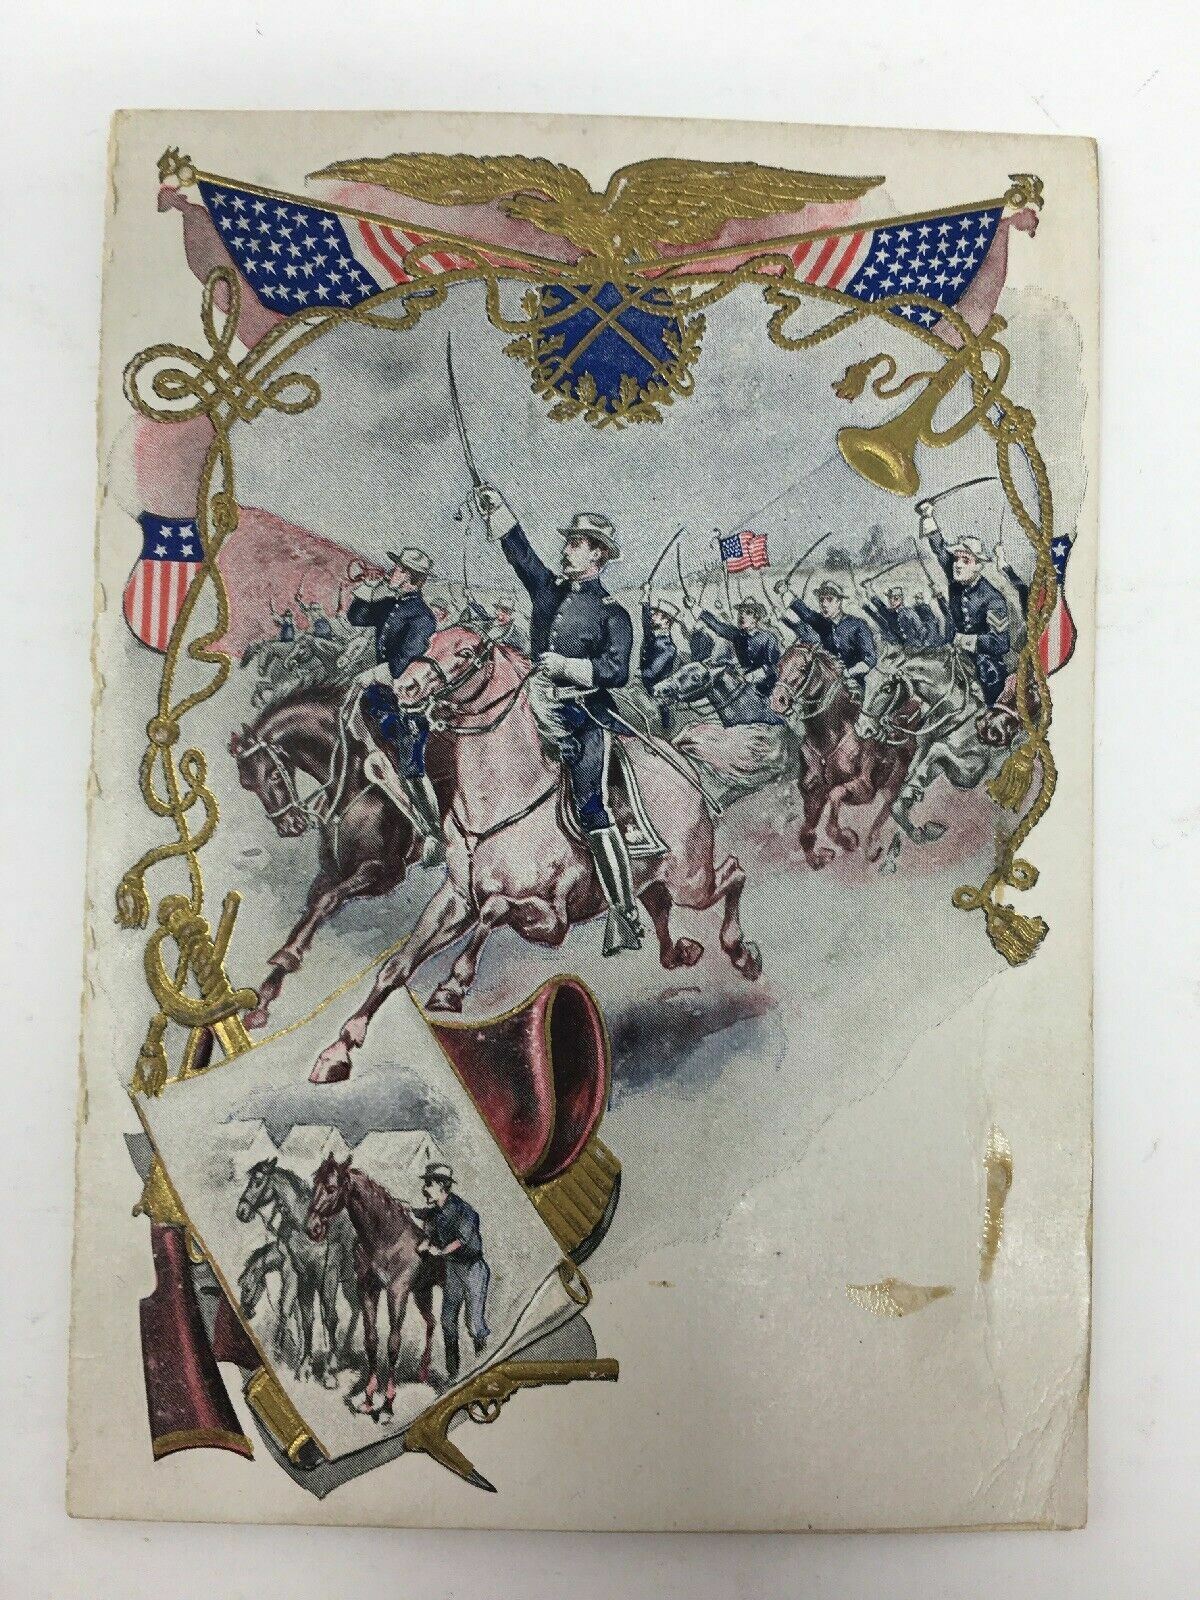 1911 Dinner Invitation in honor of Old Soldiers Civil War Antique